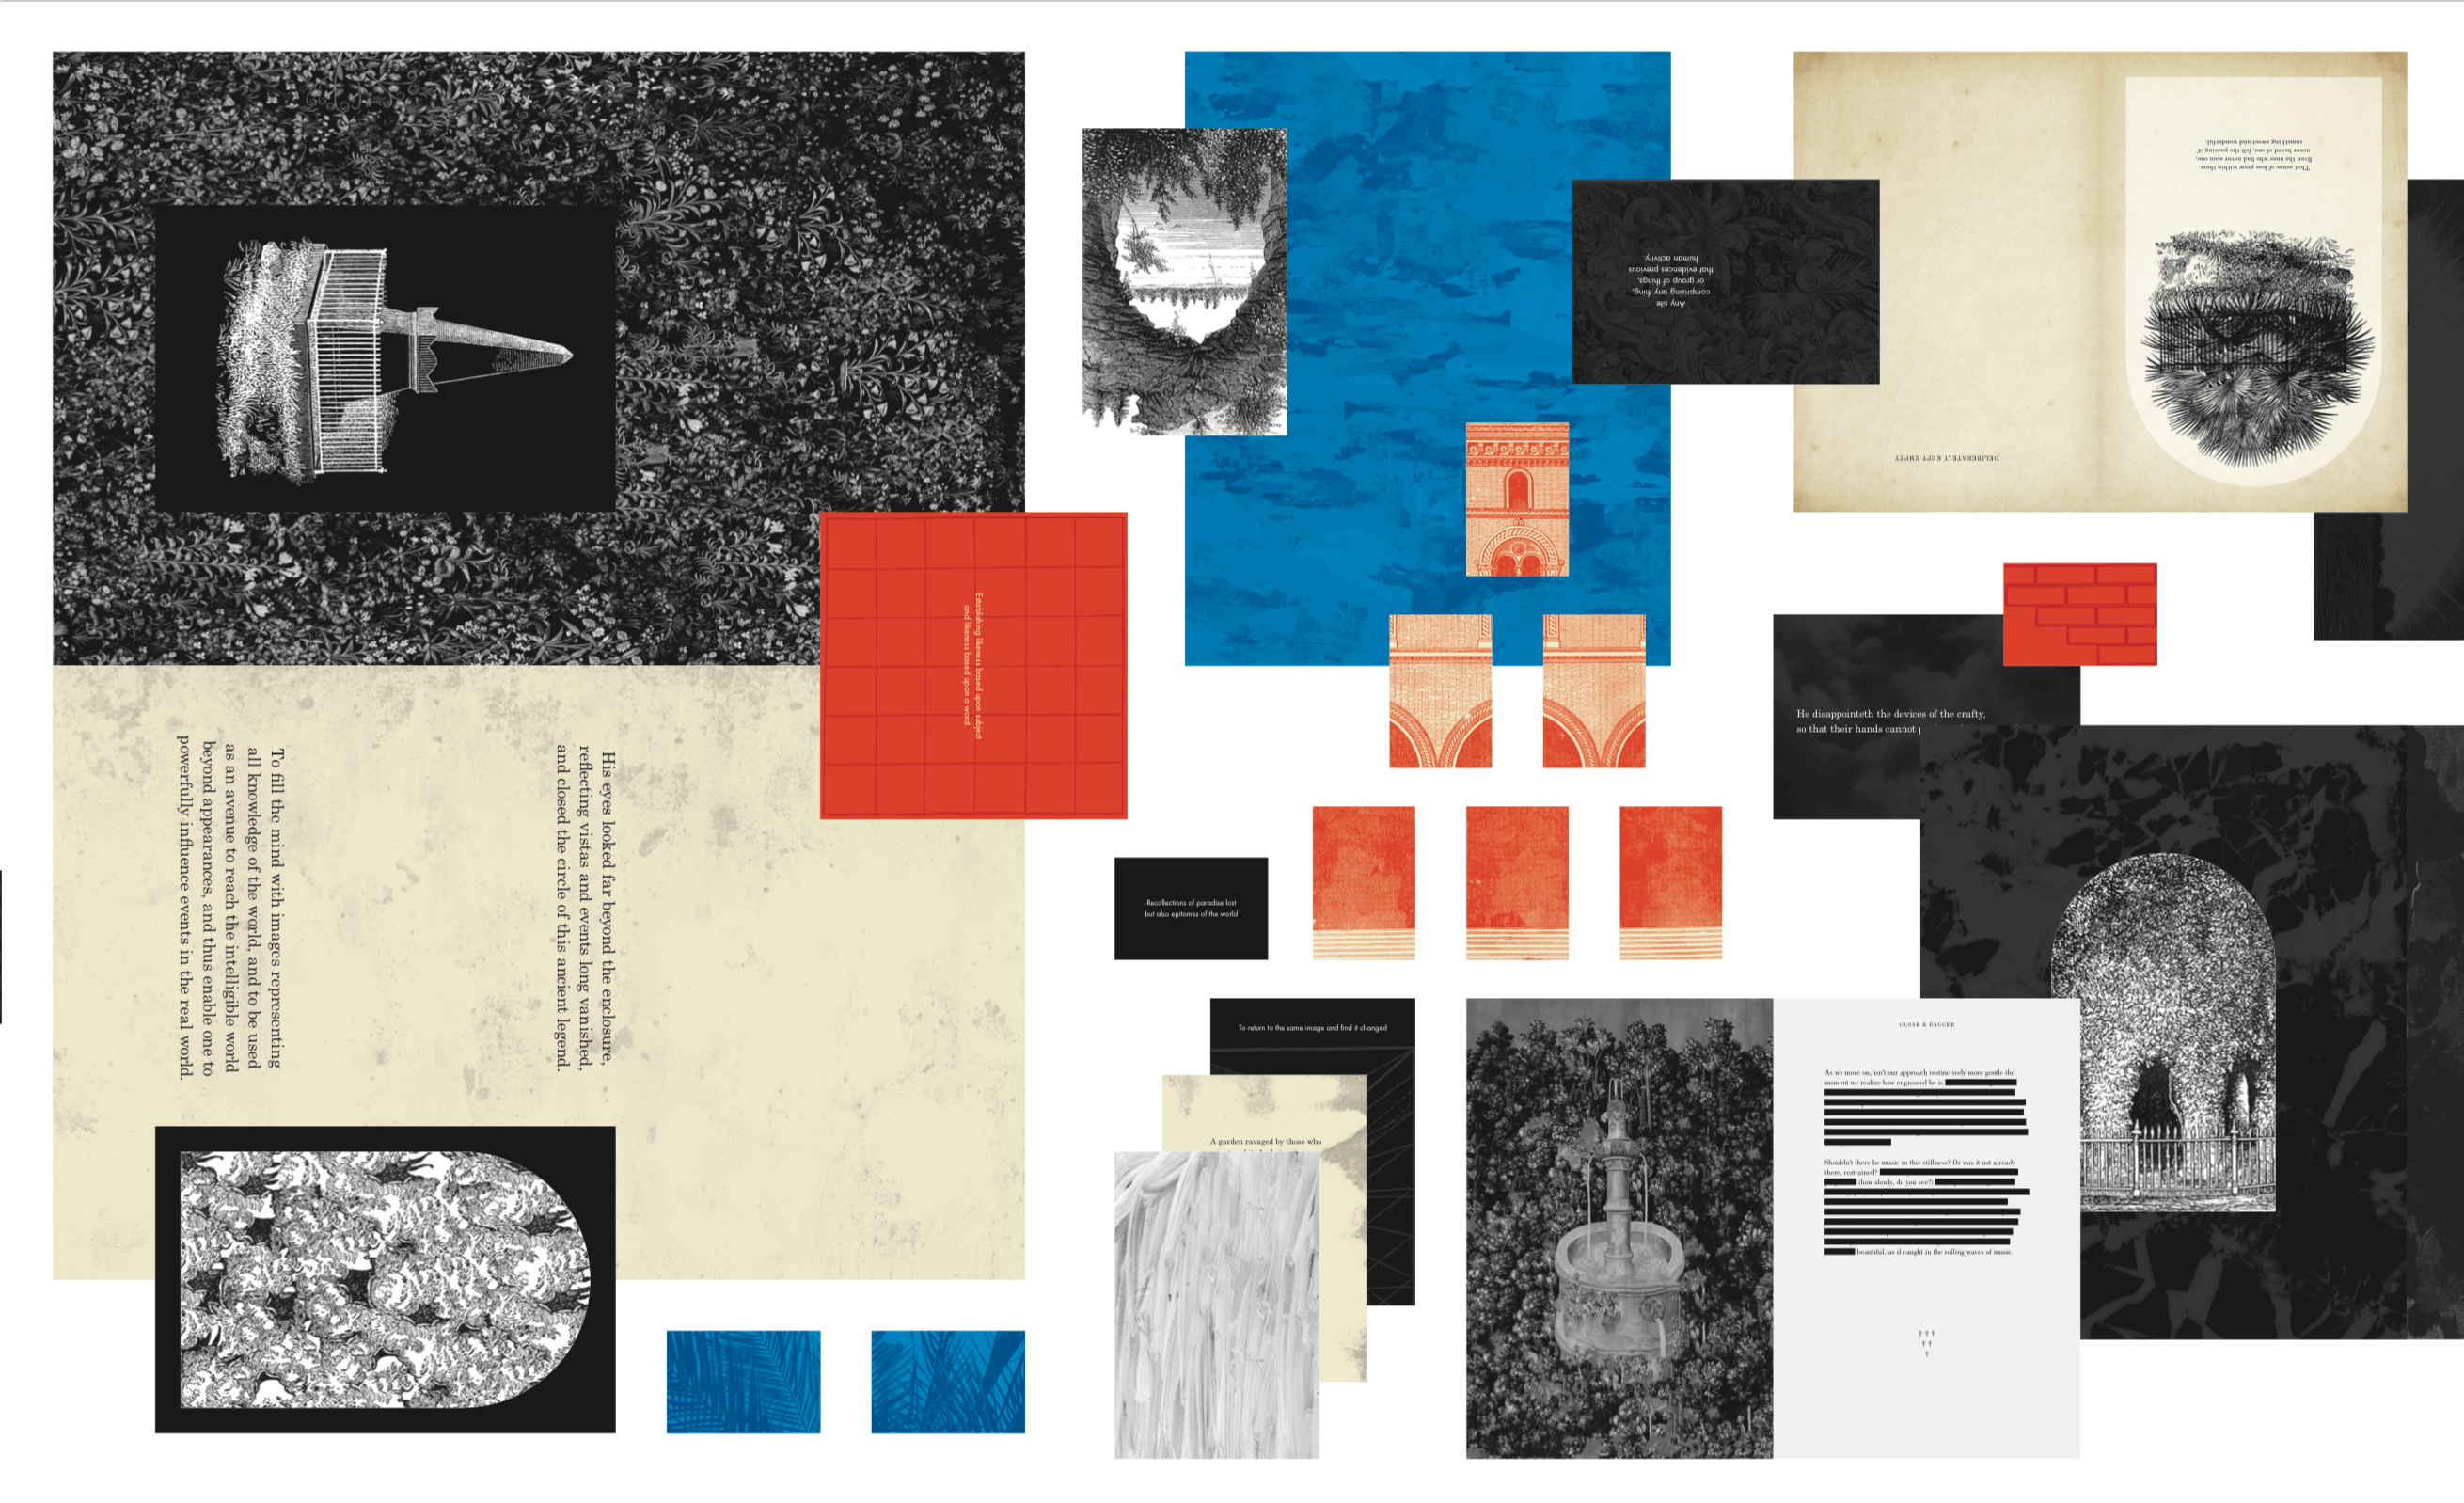 A collage of prints, book pages, greyscale textures, blue and red boxes.